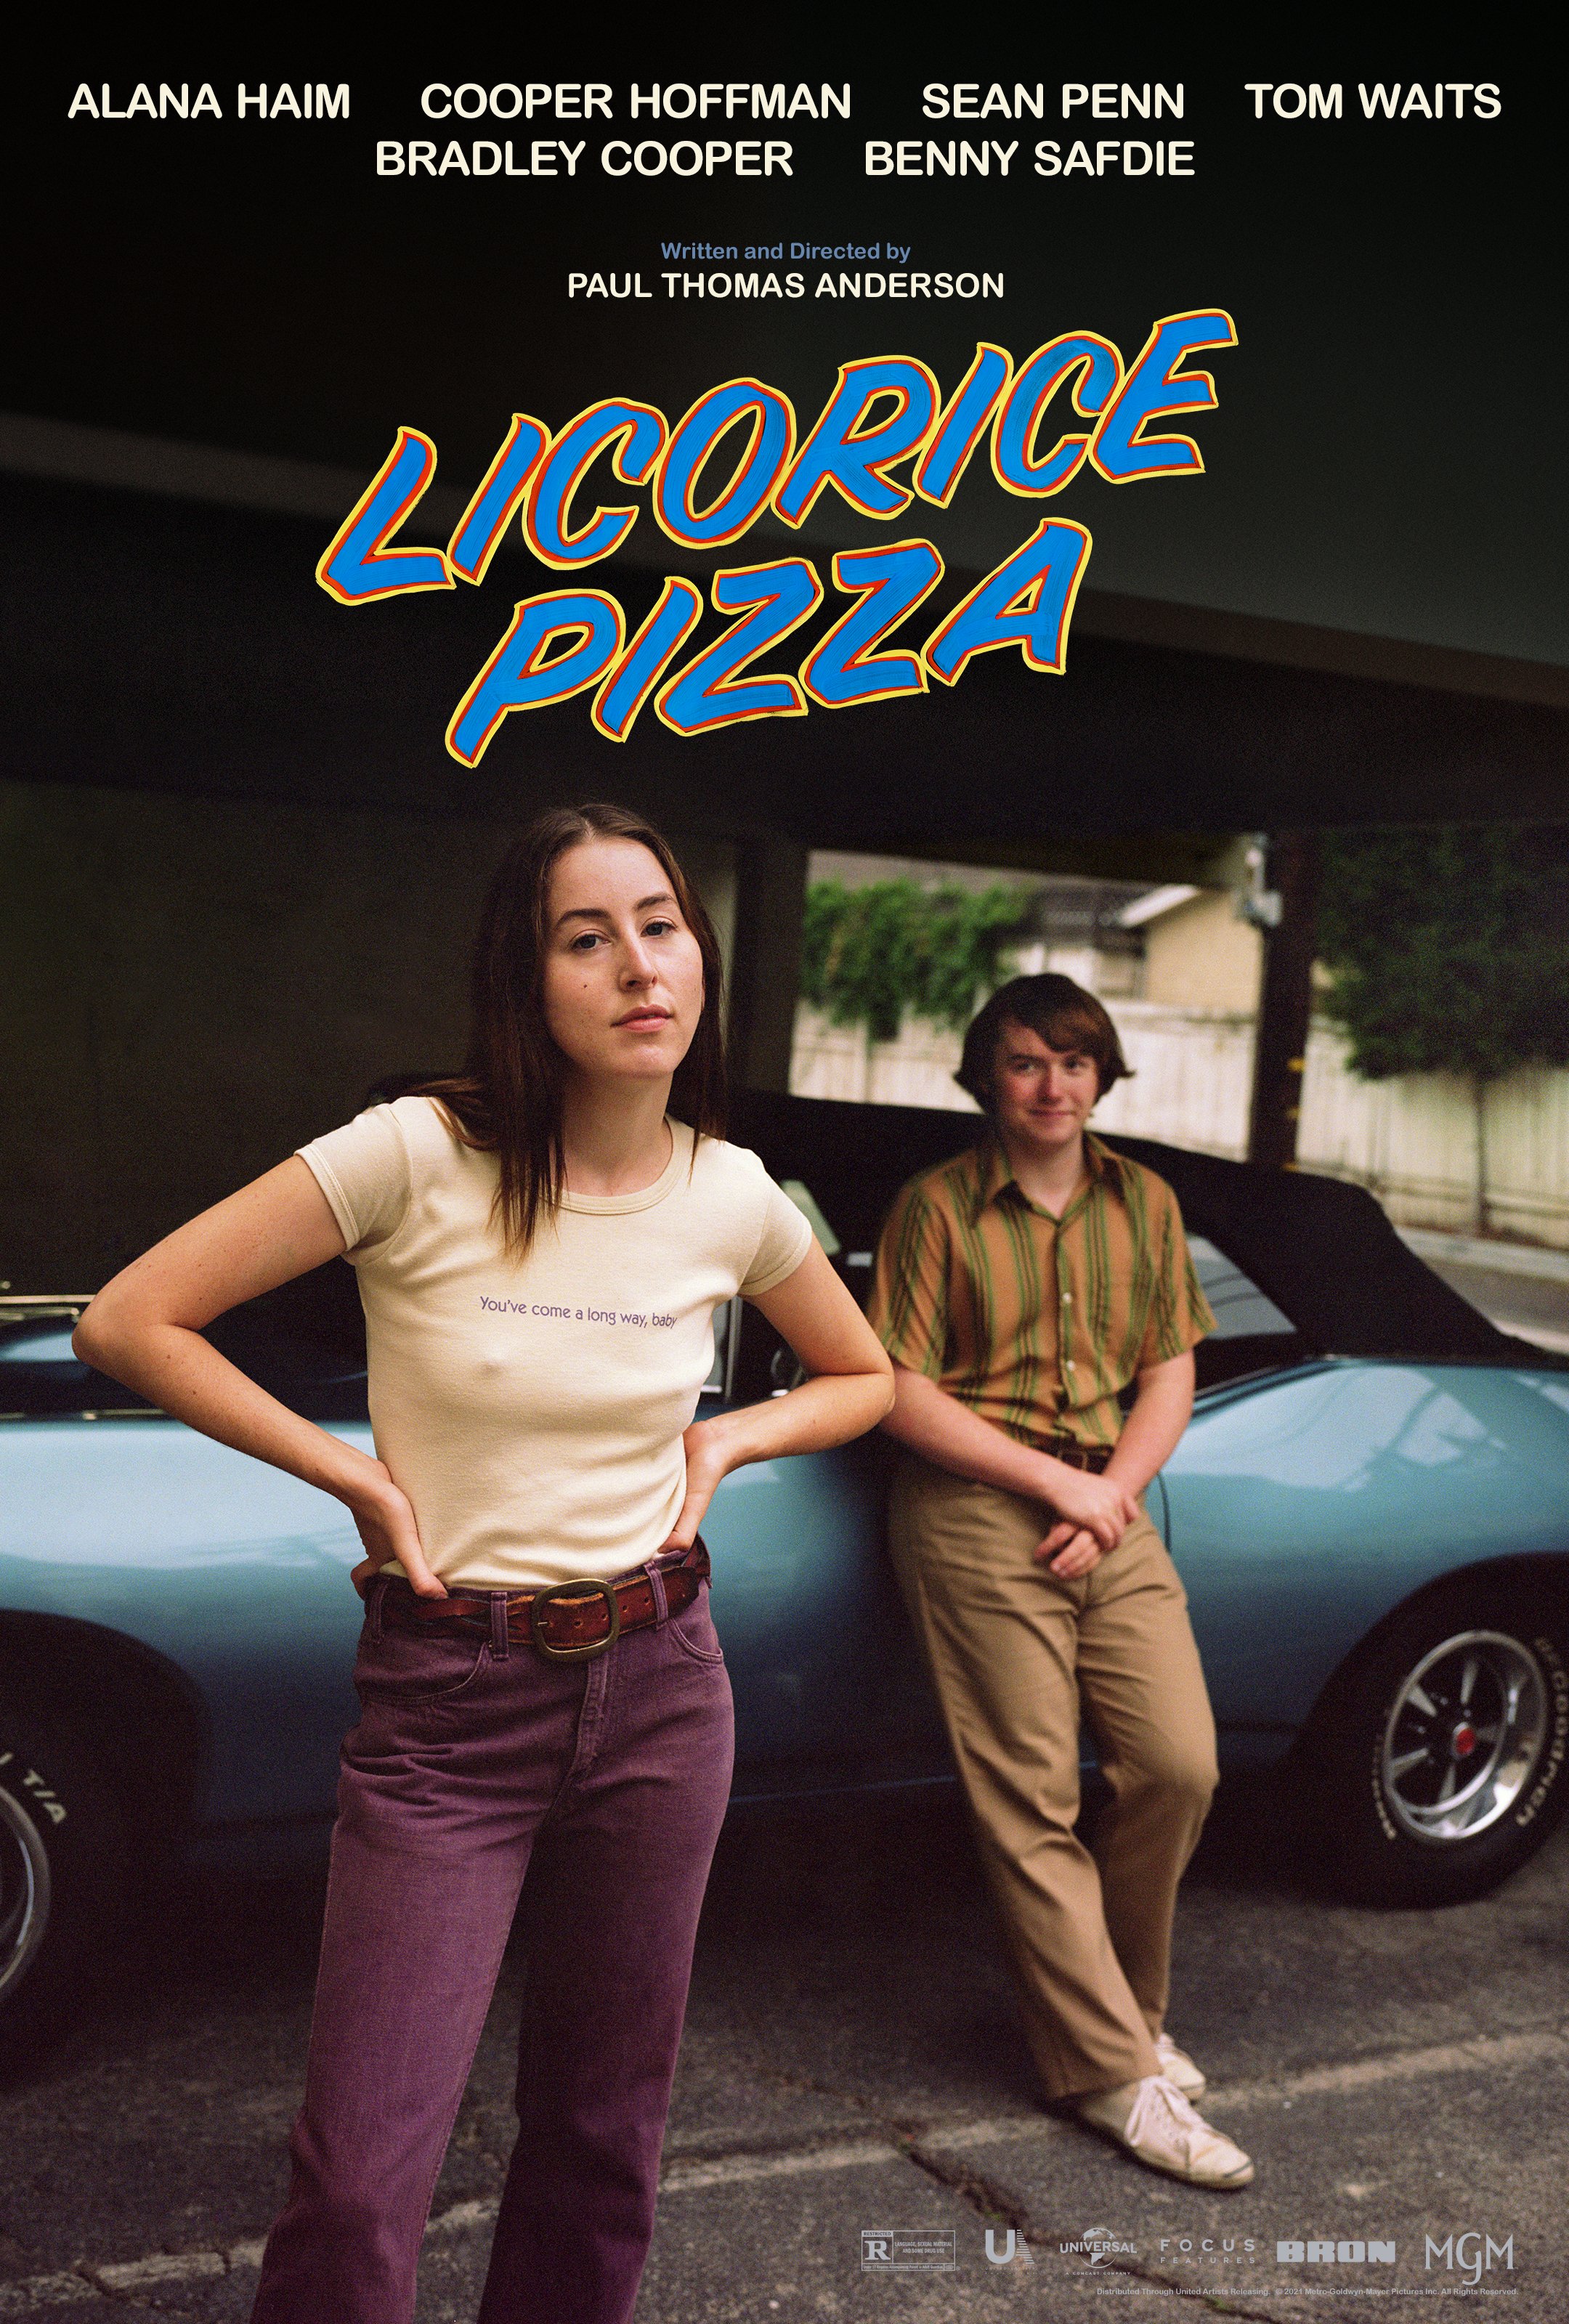 Licorice Pizza on Twitter: "Official Poster for #LicoricePizza – Written  and directed by Paul Thomas Anderson. https://t.co/wBM4TBBQ5y" / Twitter